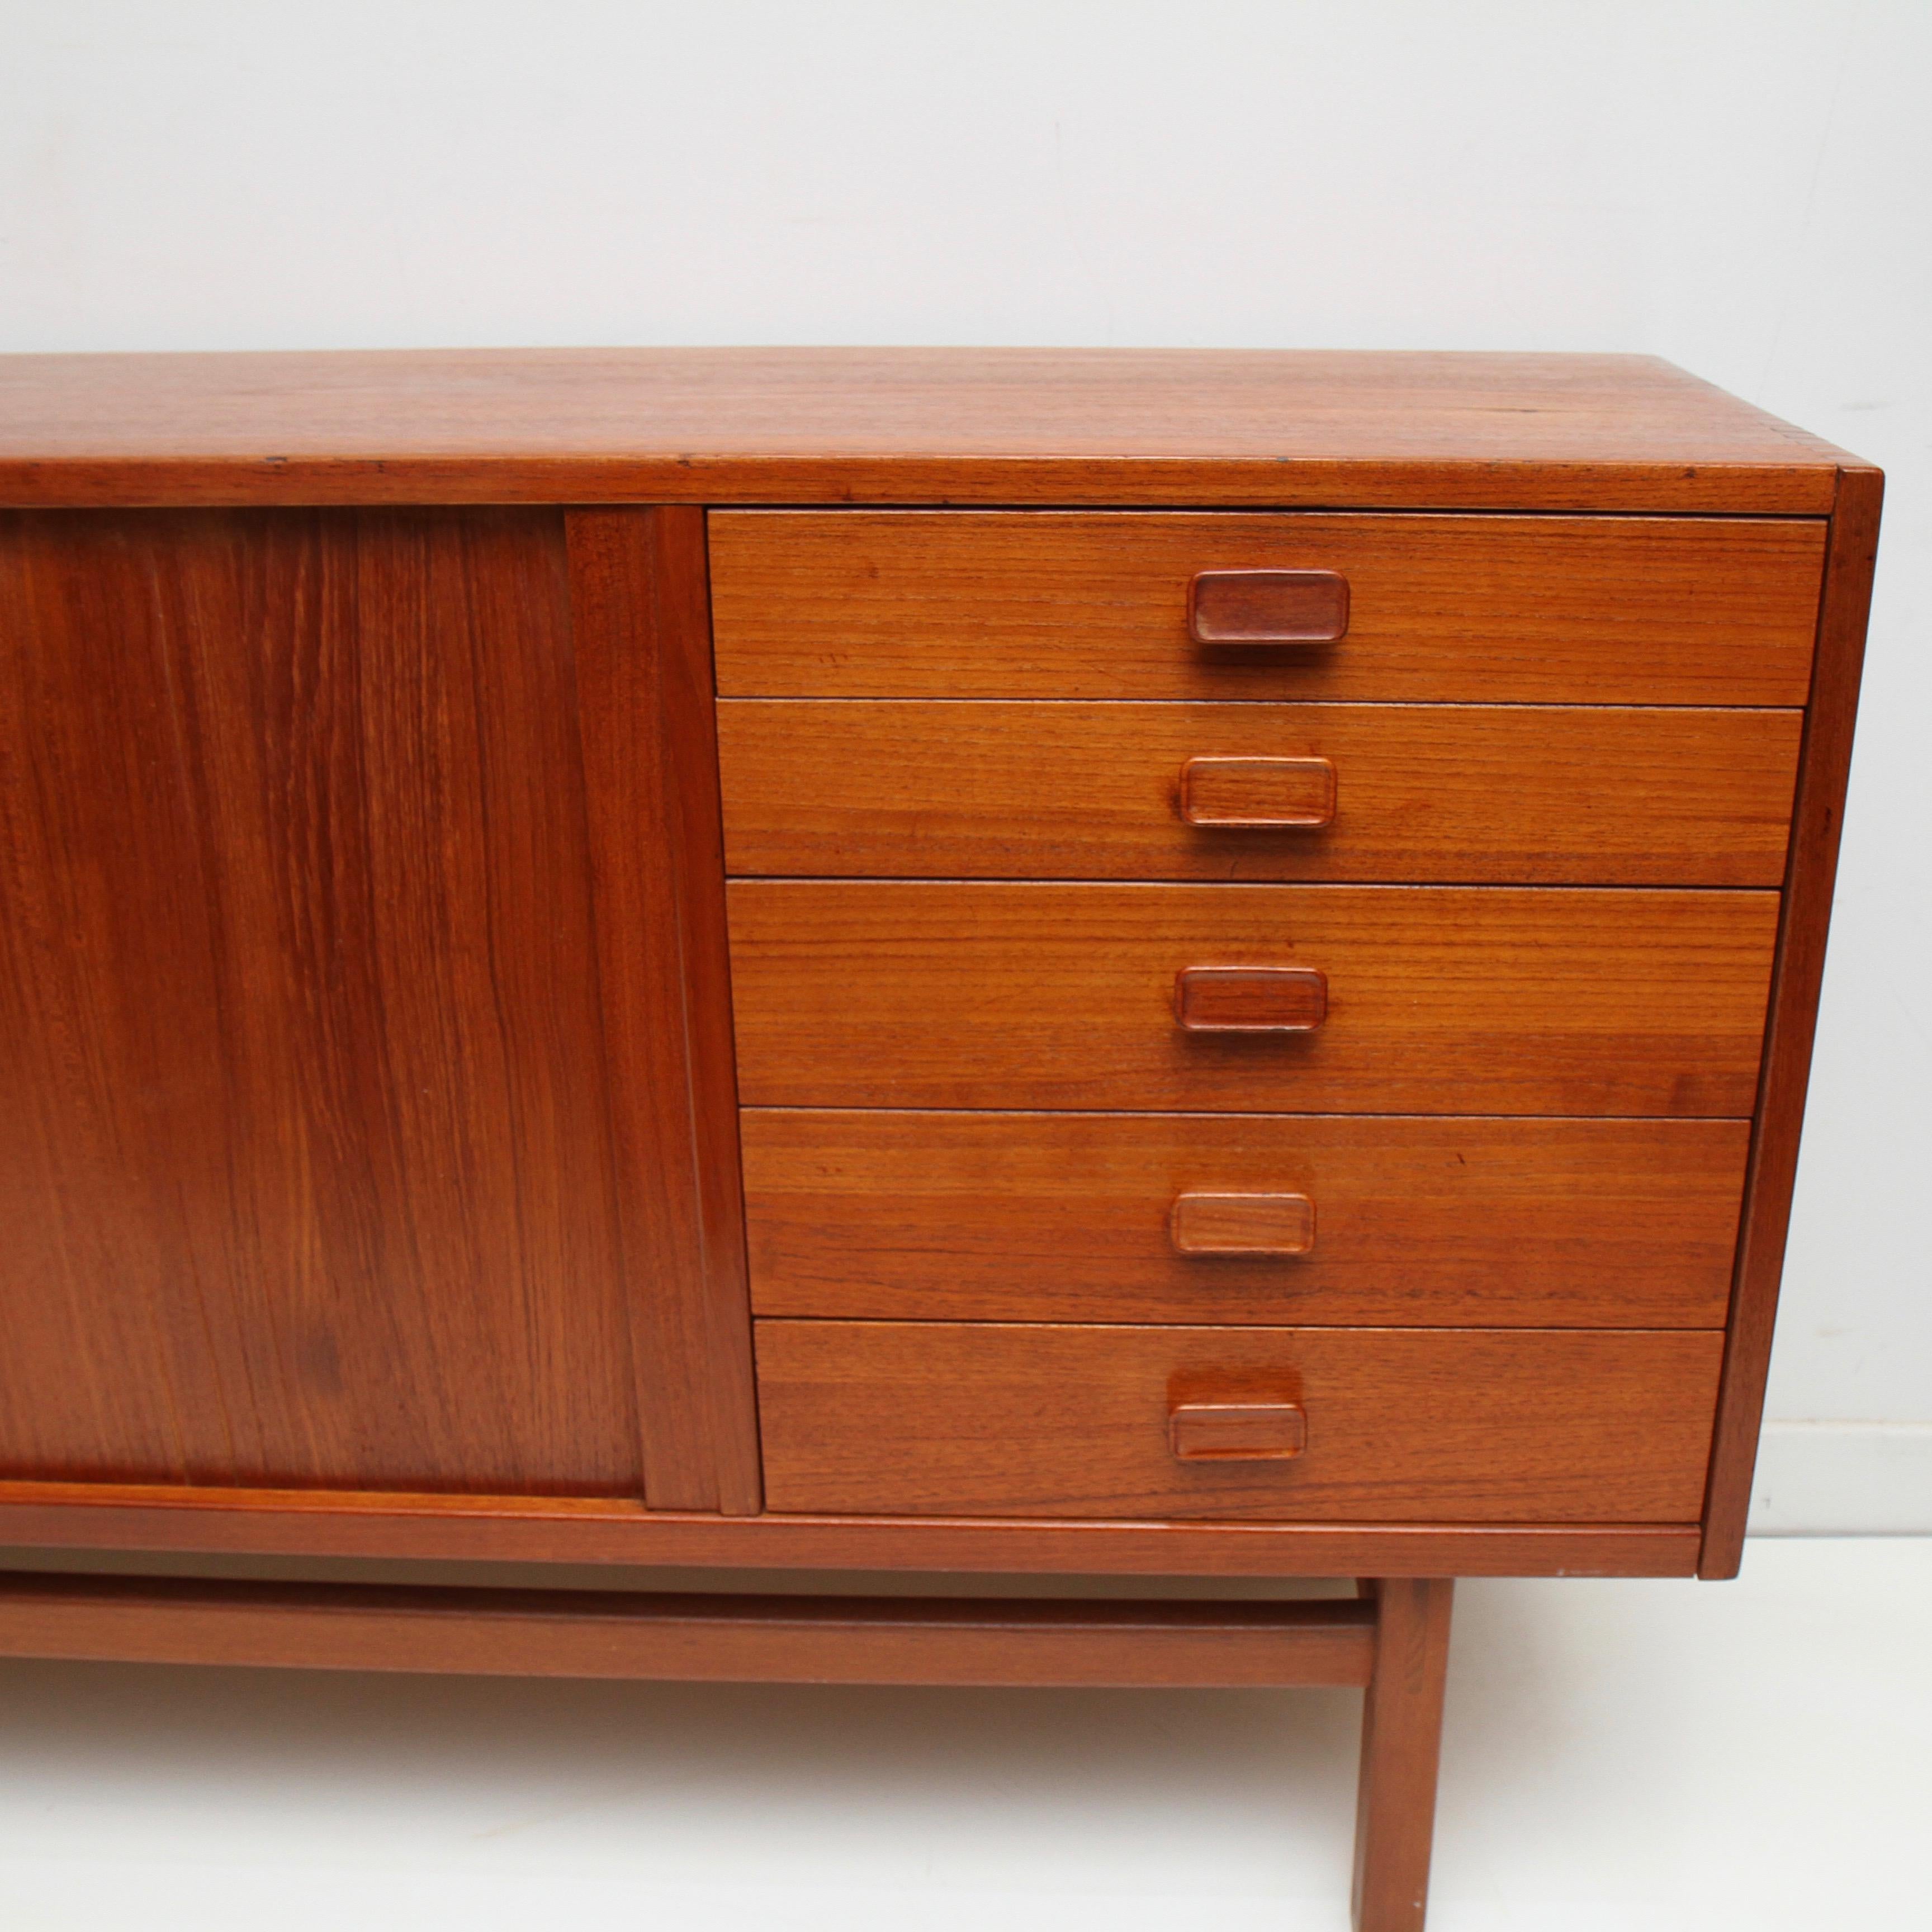 Clean Server sideboard fresh from its first gig of 50 years and ready for its second 50. 

Troeds is a well known Swedish producer famous for their vintage design pieces. In 1934 Svea Och Hugo Troedsson (also known as Troeds) started the furniture